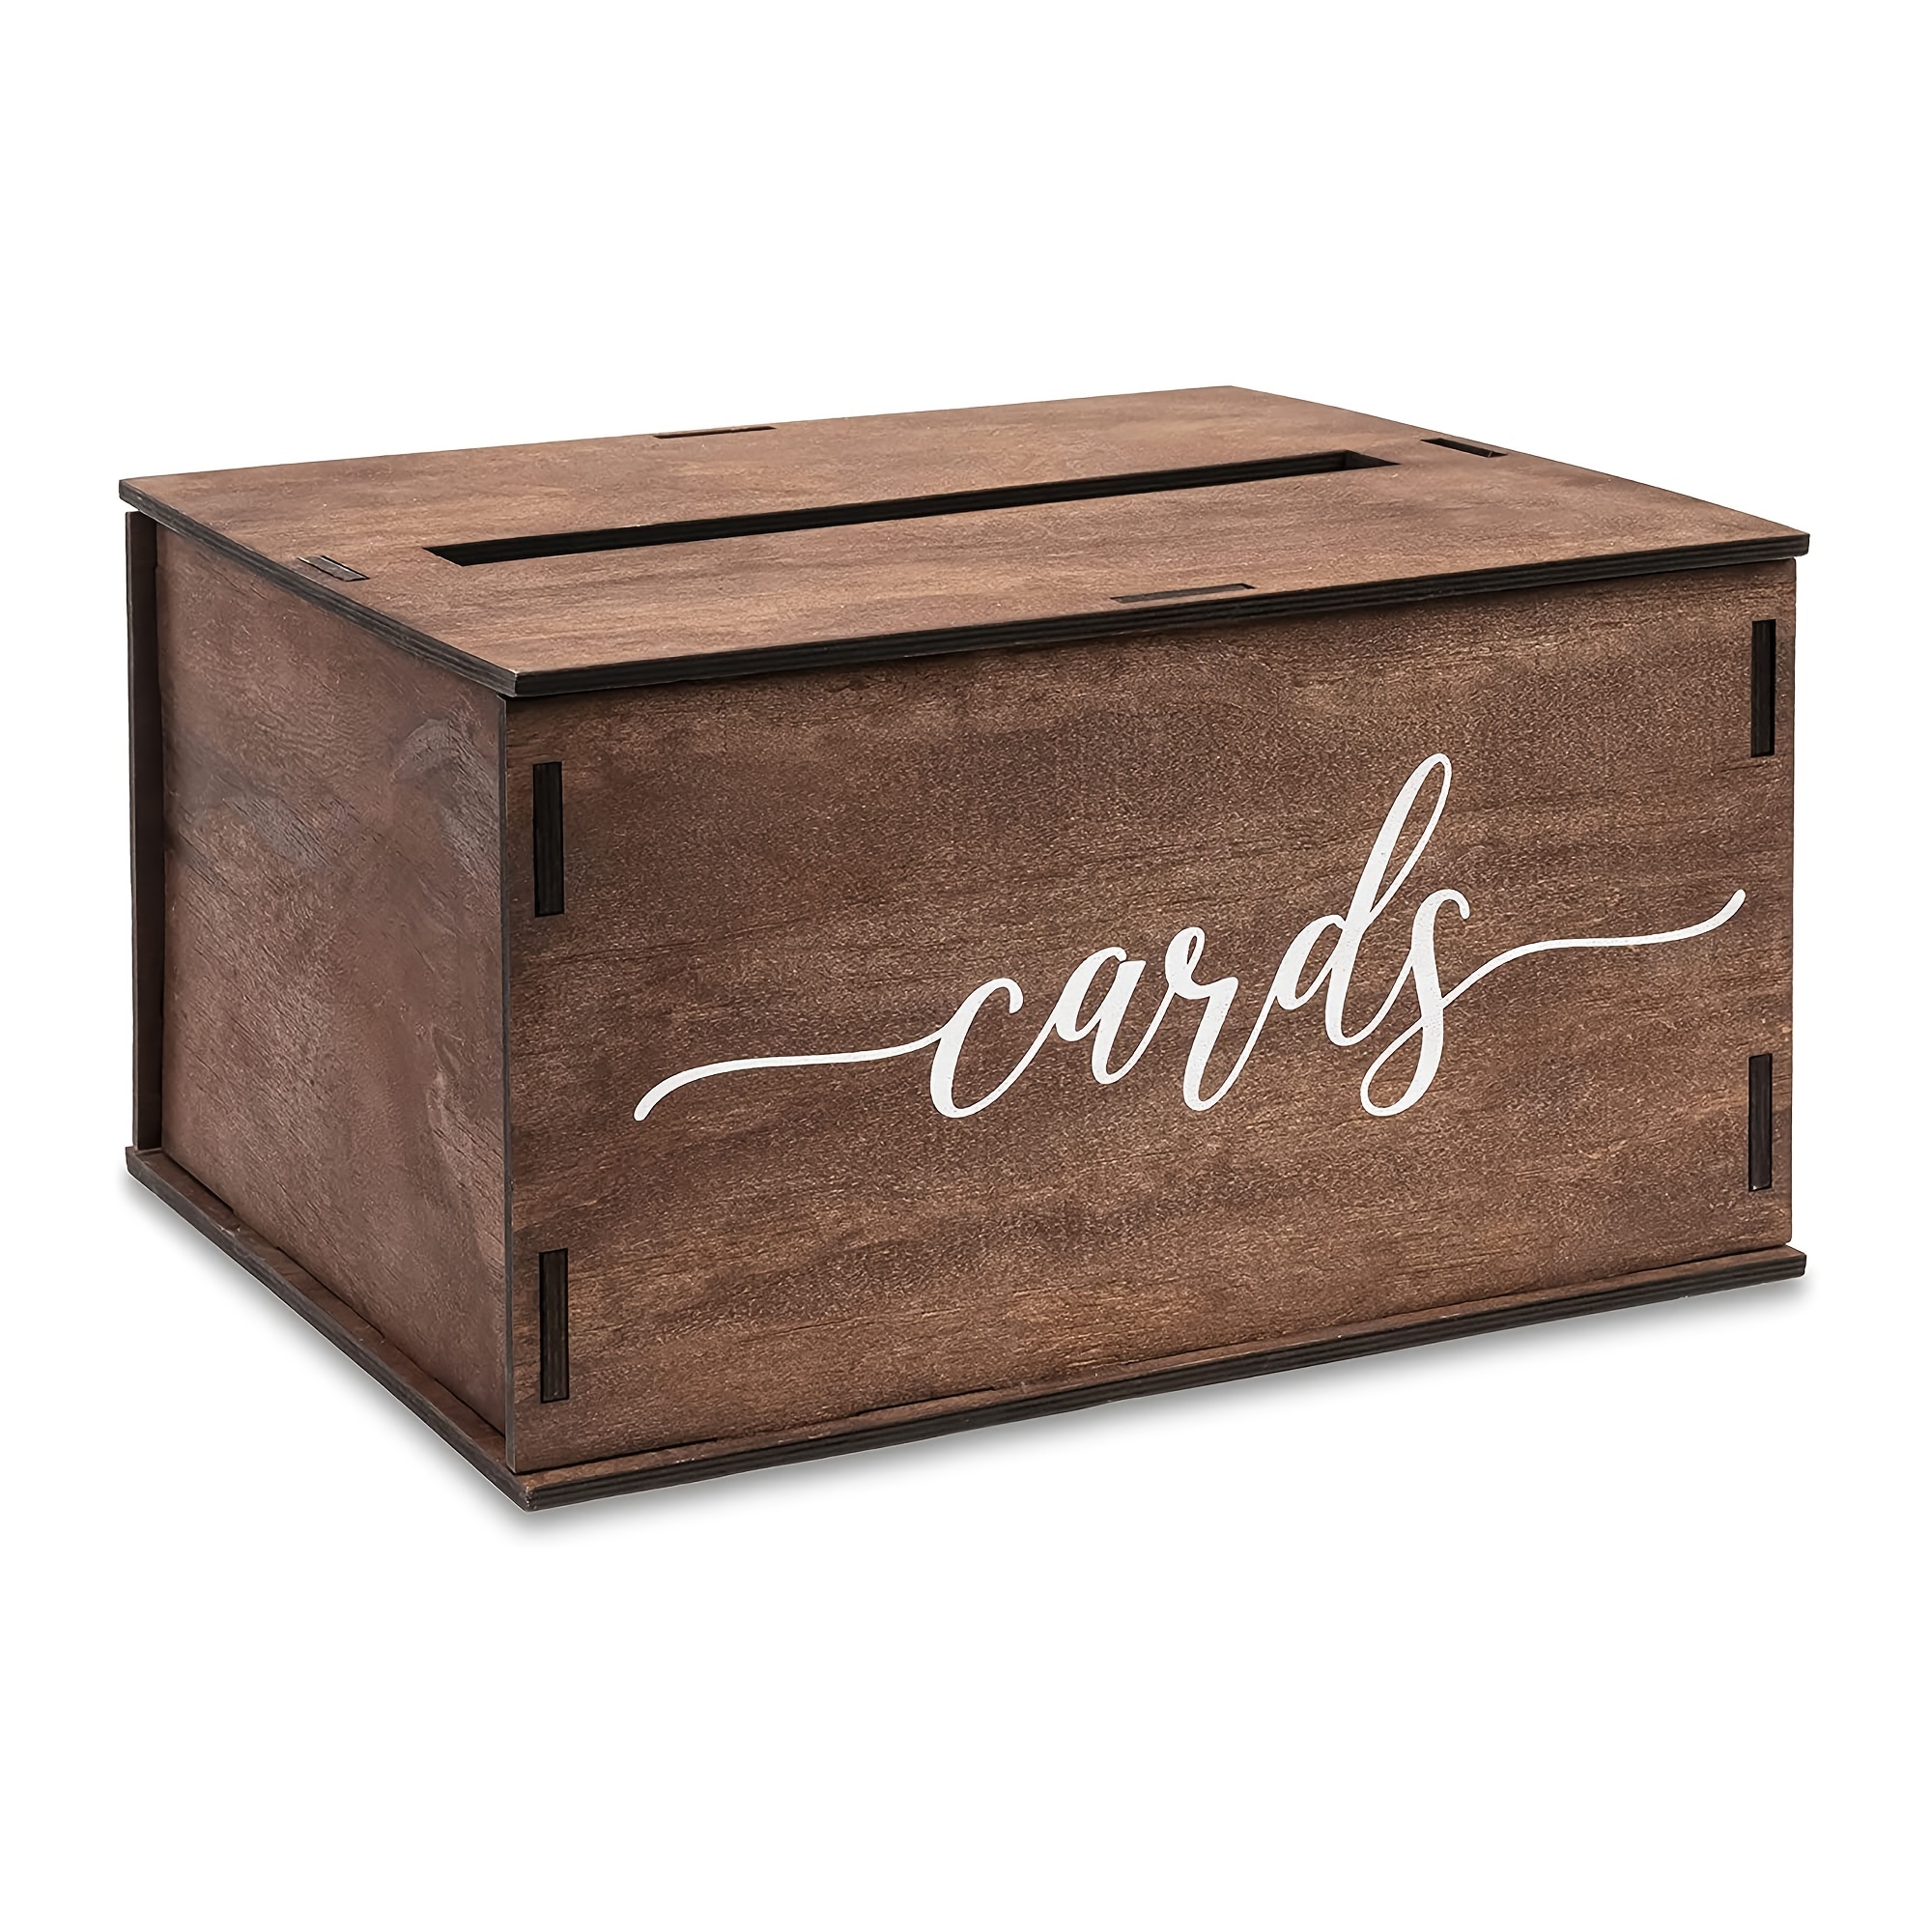 New DIY Rustic Wedding Card Box Wooden Wedding Card Boxes Money Sign-in Box  Reception Rustic Beautiful Party Favor Decoration